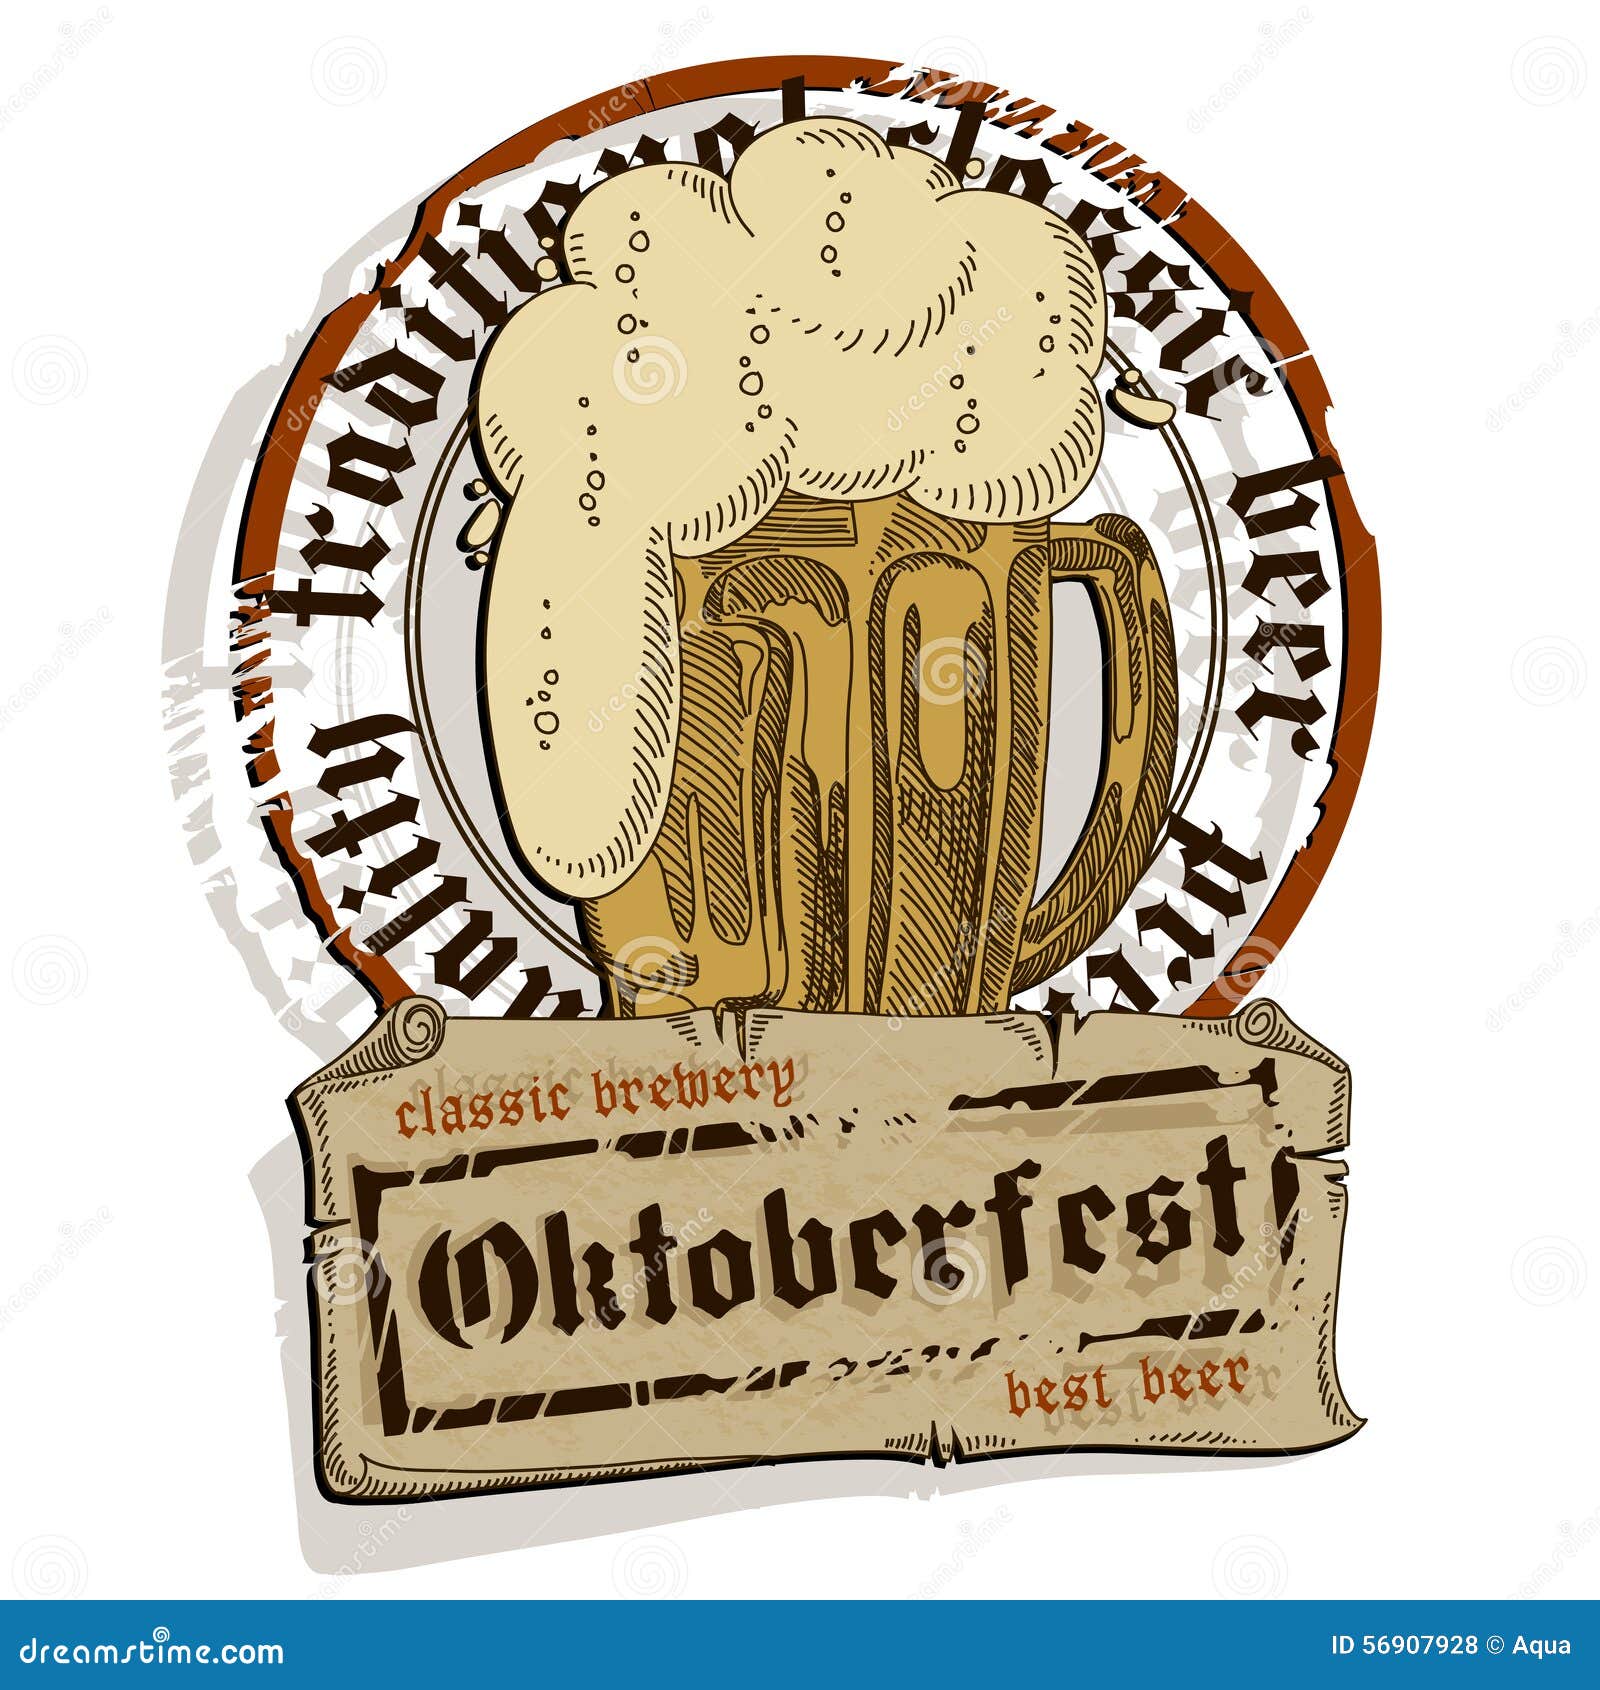 Beer background editorial stock photo. Illustration of style - 56907928